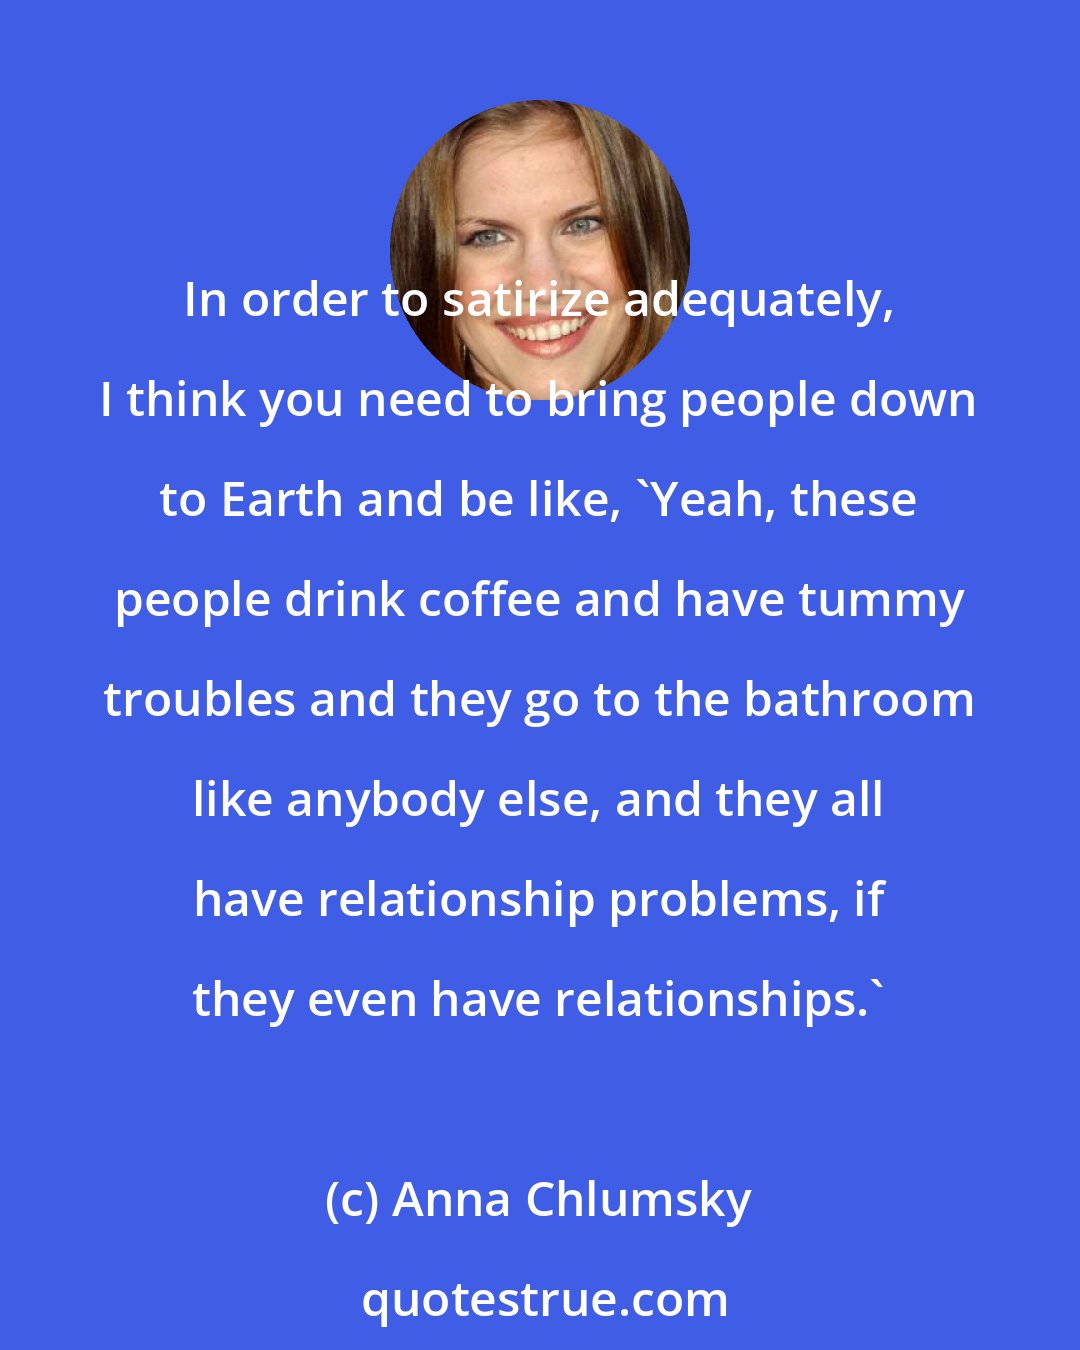 Anna Chlumsky: In order to satirize adequately, I think you need to bring people down to Earth and be like, 'Yeah, these people drink coffee and have tummy troubles and they go to the bathroom like anybody else, and they all have relationship problems, if they even have relationships.'